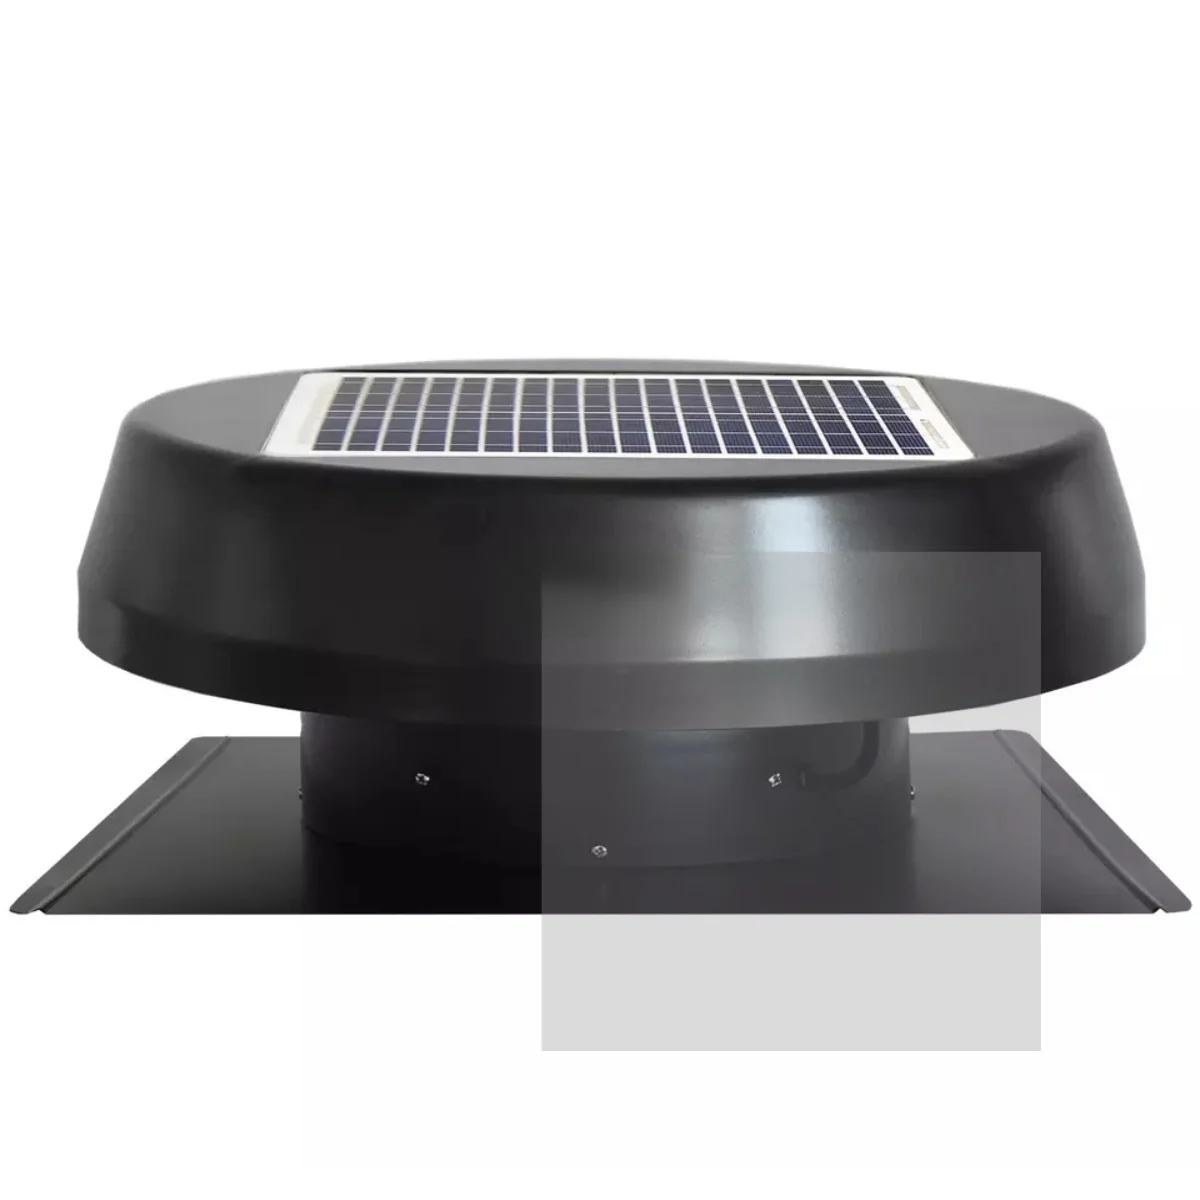 

Roof Top Tunnel Green Air Vent High Speed Ceiling Ventilation Solar Powered Attic Heat Extractor Fan 14'' DC Air Circulator Fan